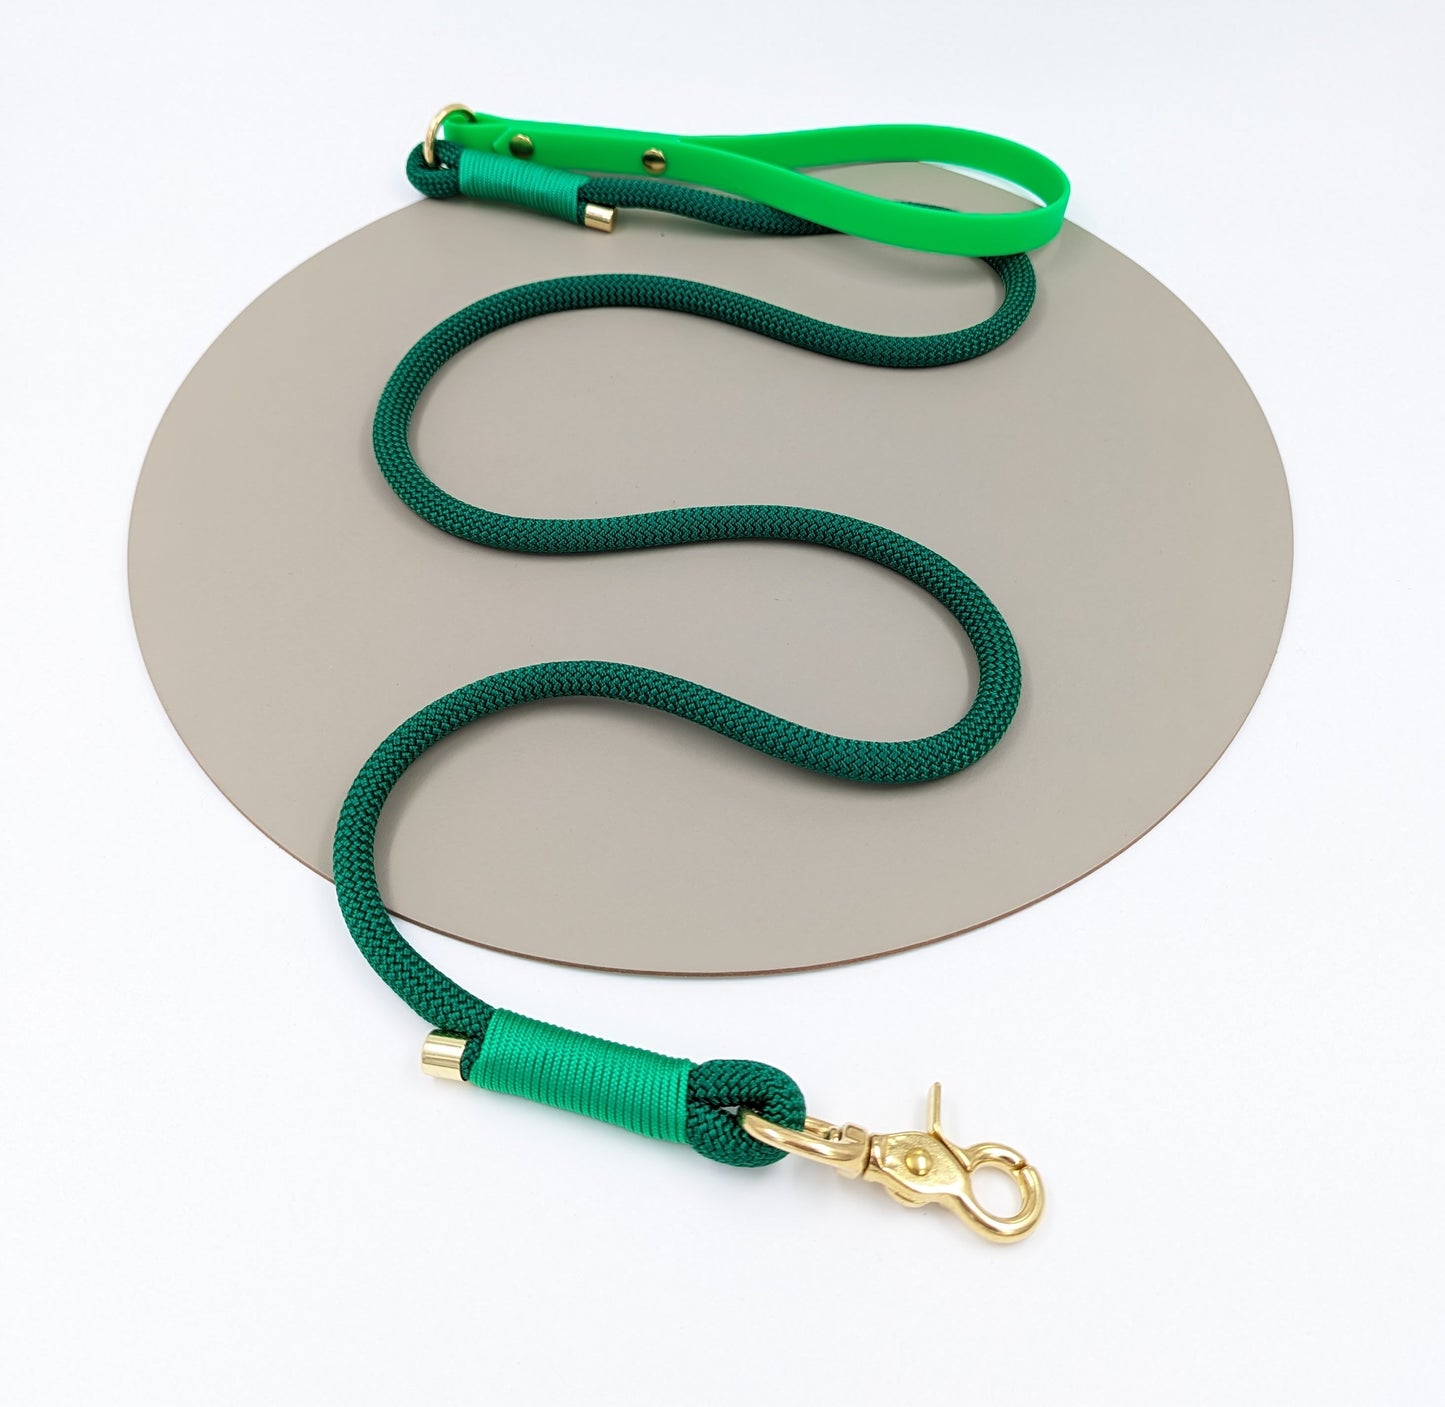 Rope lead with biothane handle - Design your own